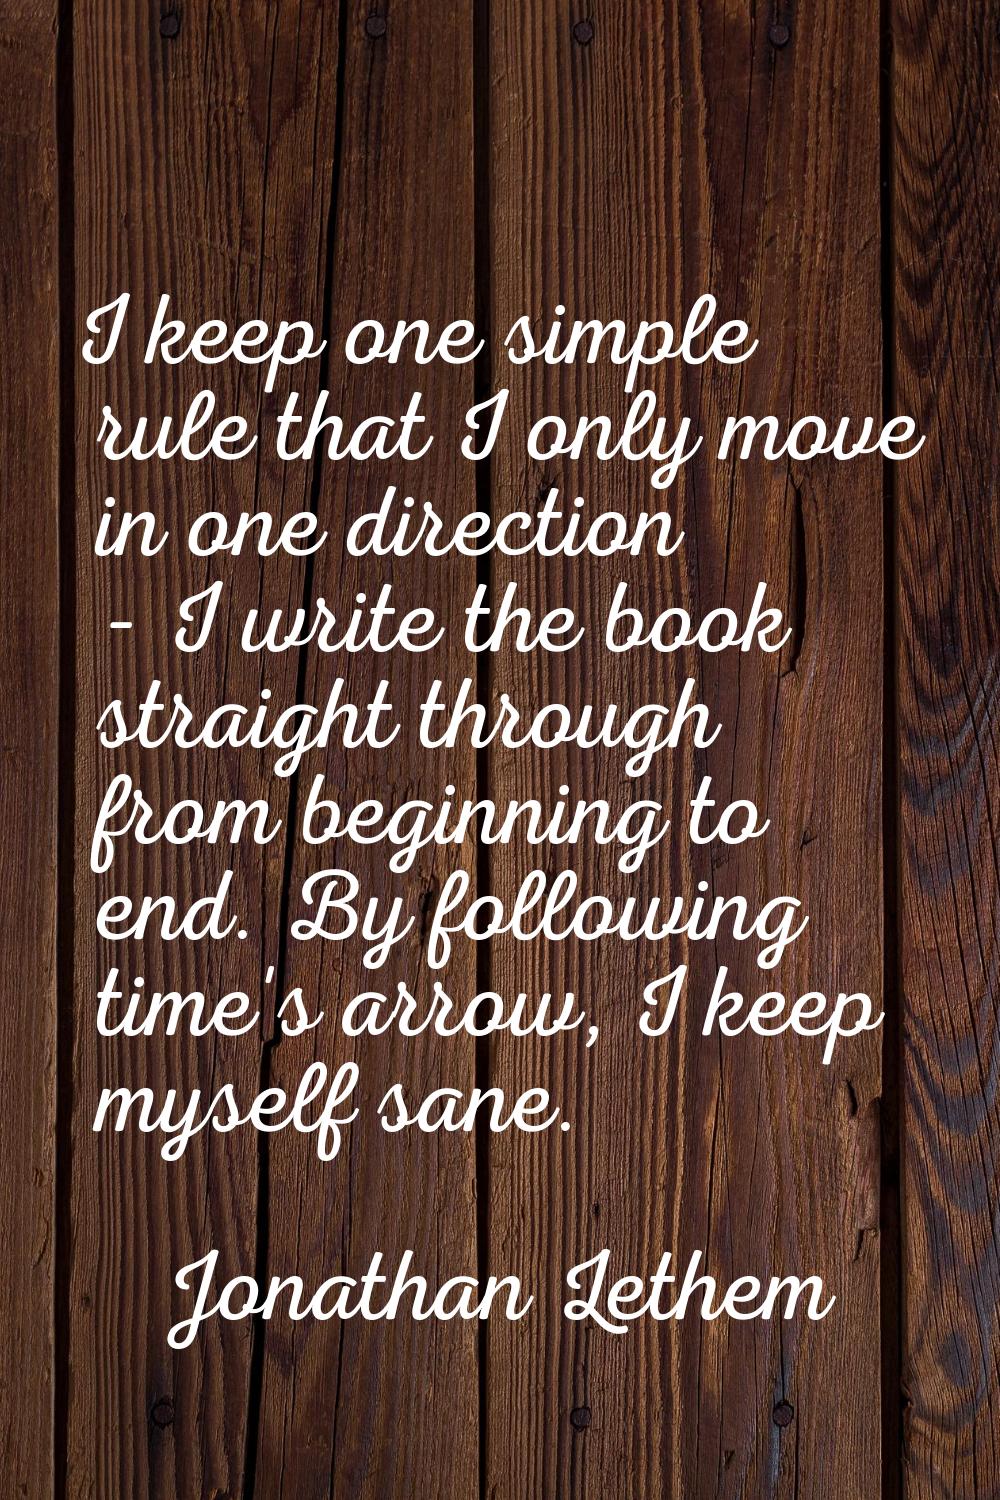 I keep one simple rule that I only move in one direction - I write the book straight through from b